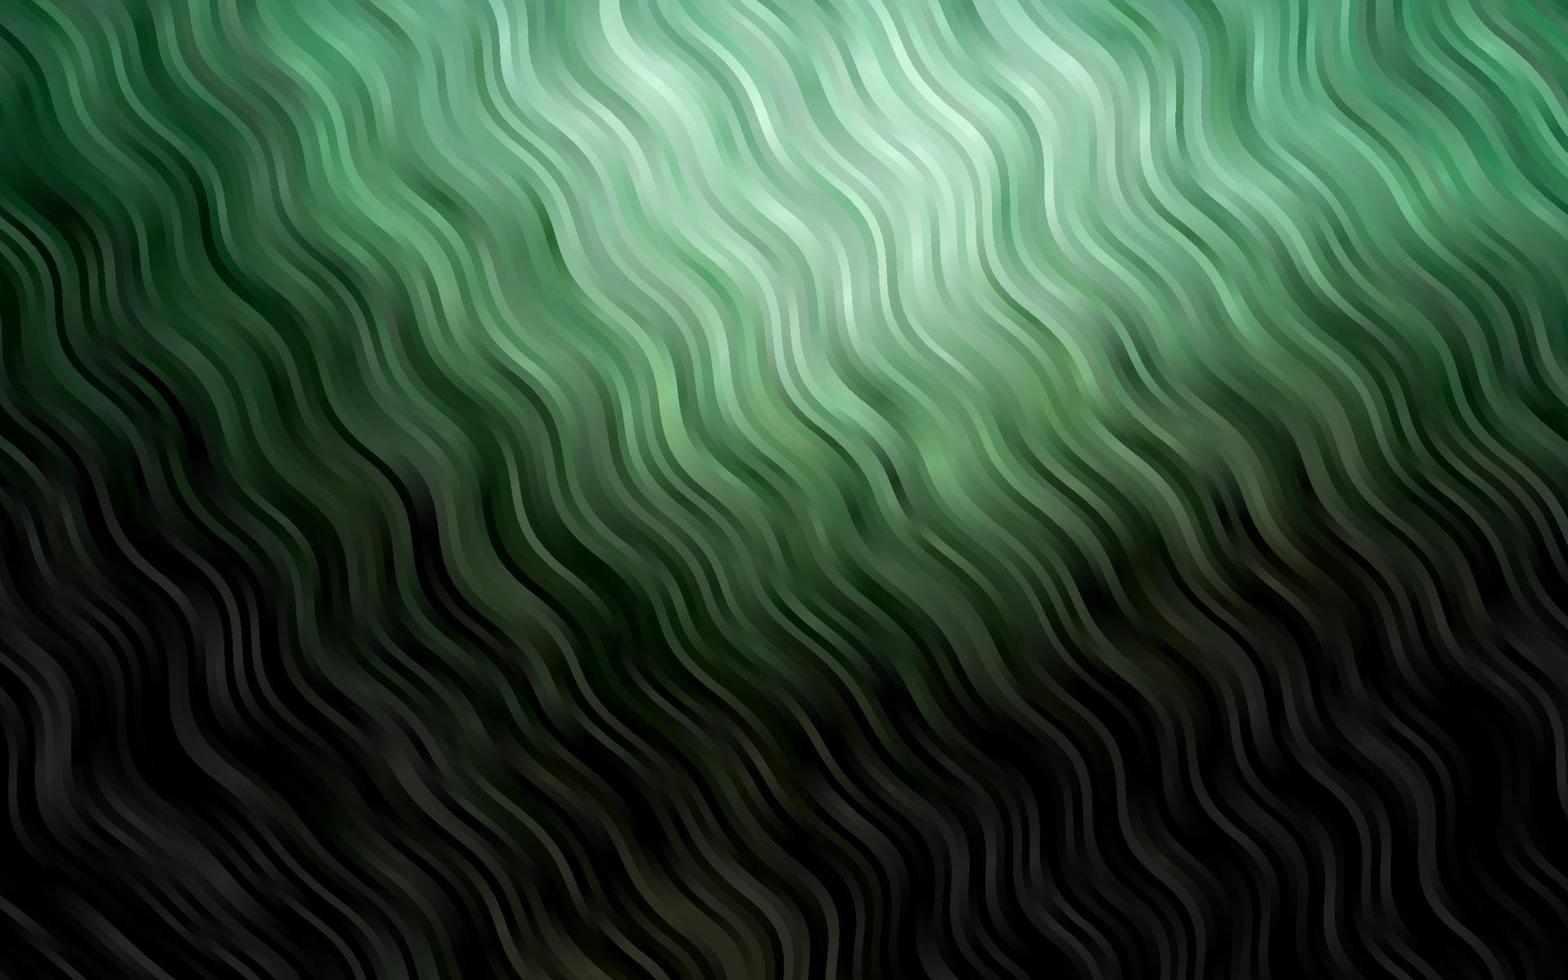 Dark Green vector template with abstract lines.